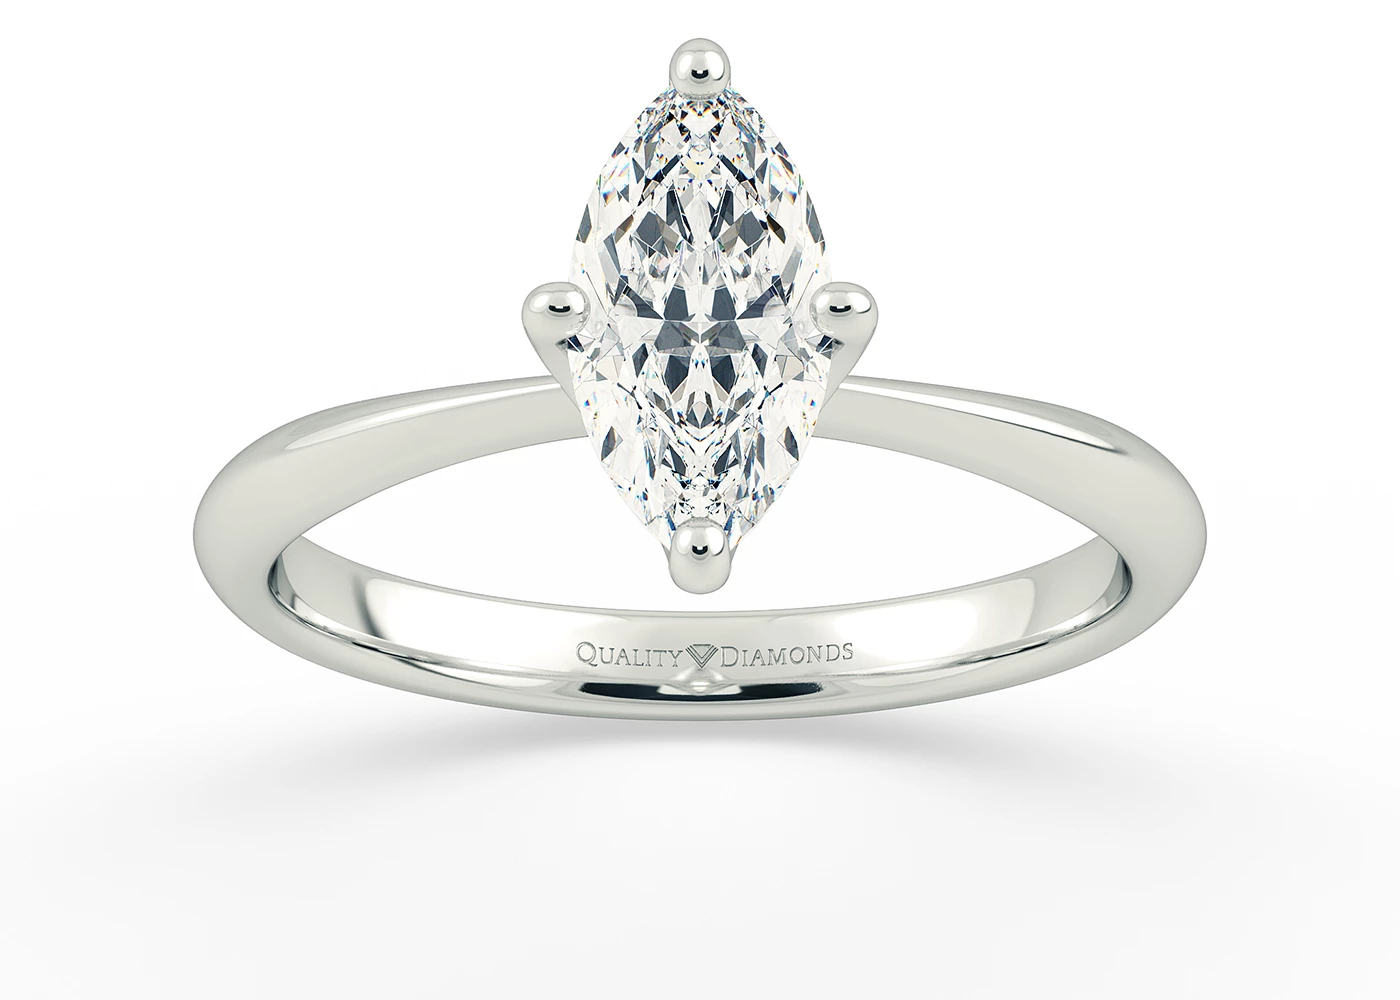 Half Carat Marquise Solitaire Diamond Engagement Ring in 9K White Gold